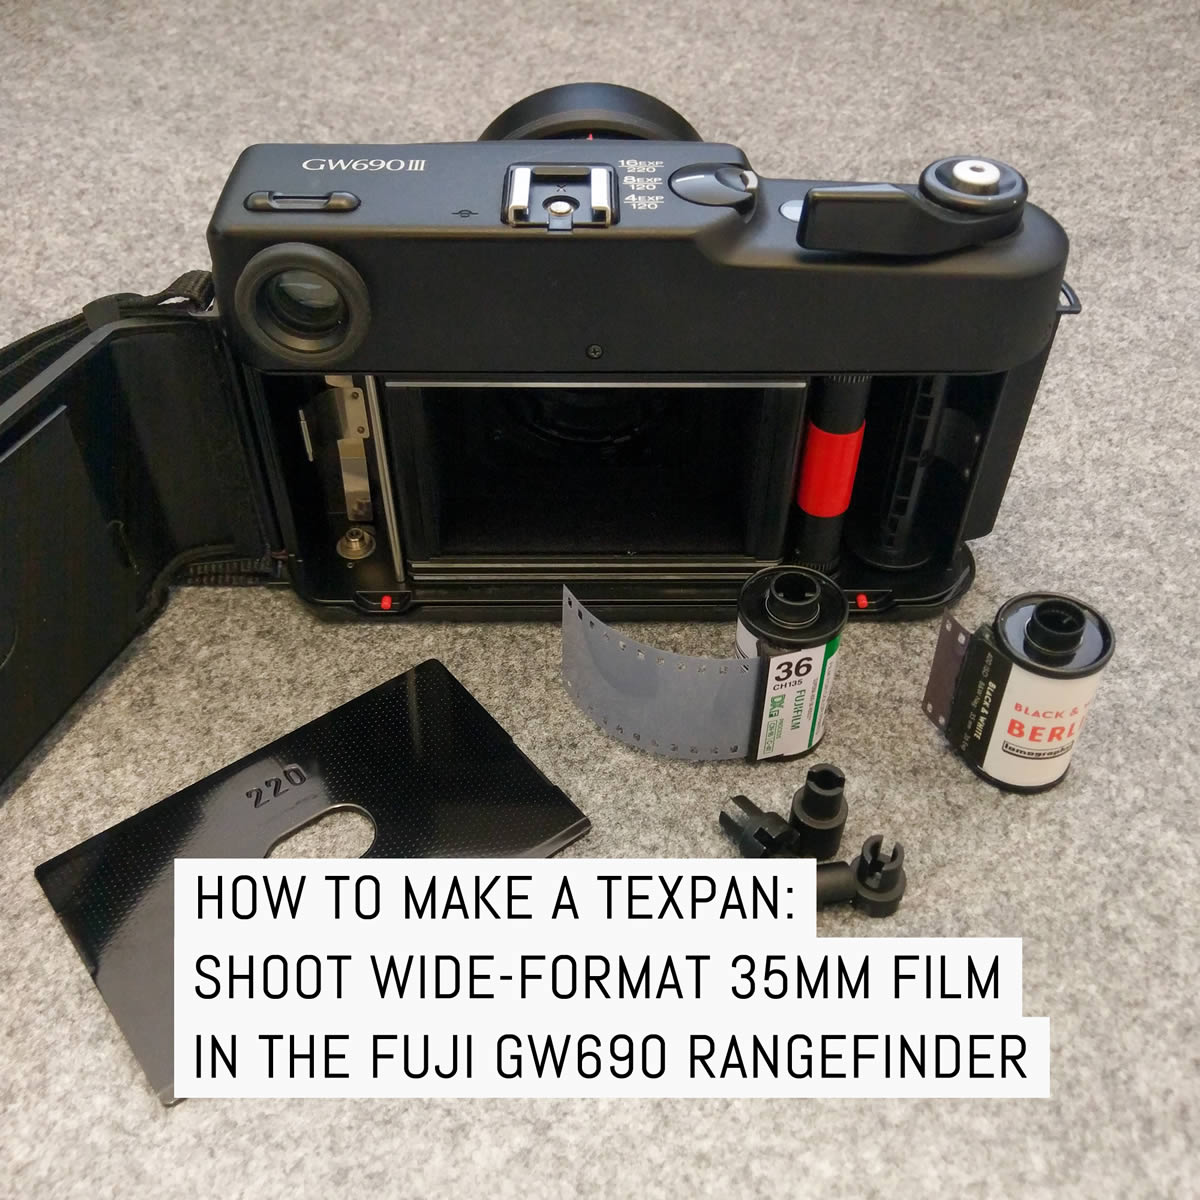 How to make a TEXPan: shoot wide-format 35mm film in the Fuji GW690III rangefinder